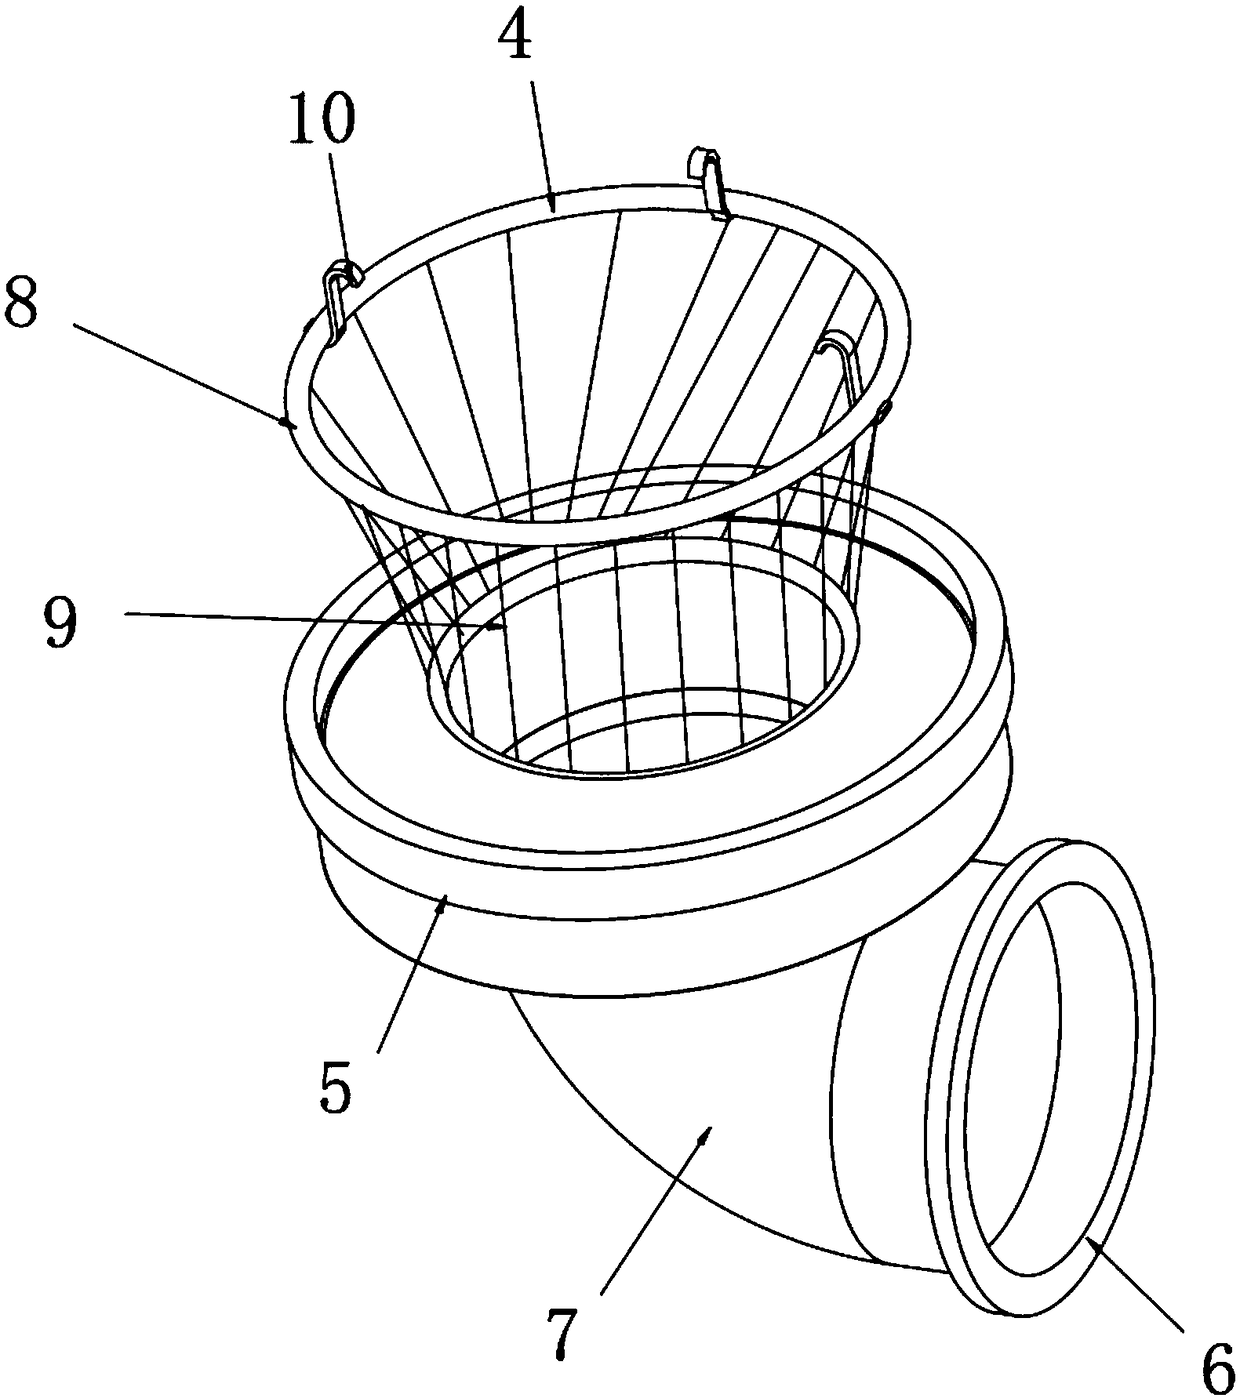 Novel basketball collecting and serving device